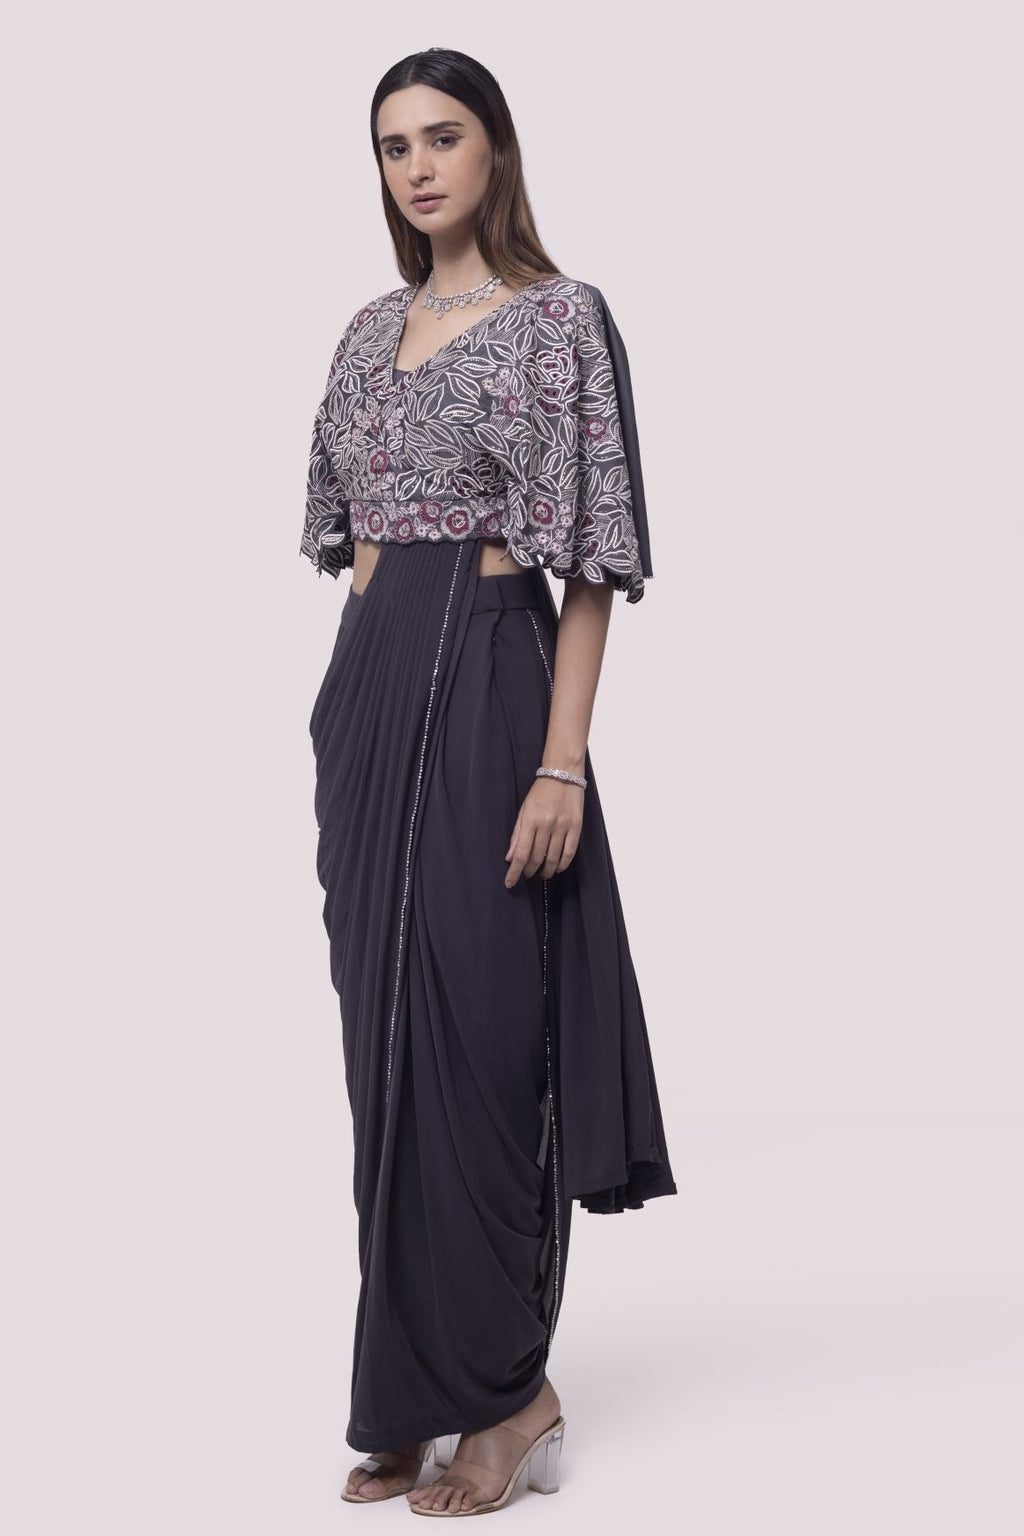 Shop grey net pre-stitched saree with flared blouse. Make a fashion statement on festive occasions and weddings with designer sarees, designer suits, Indian dresses, Anarkali suits, palazzo suits, designer gowns, sharara suits, and embroidered sarees from Pure Elegance Indian fashion store in the USA.